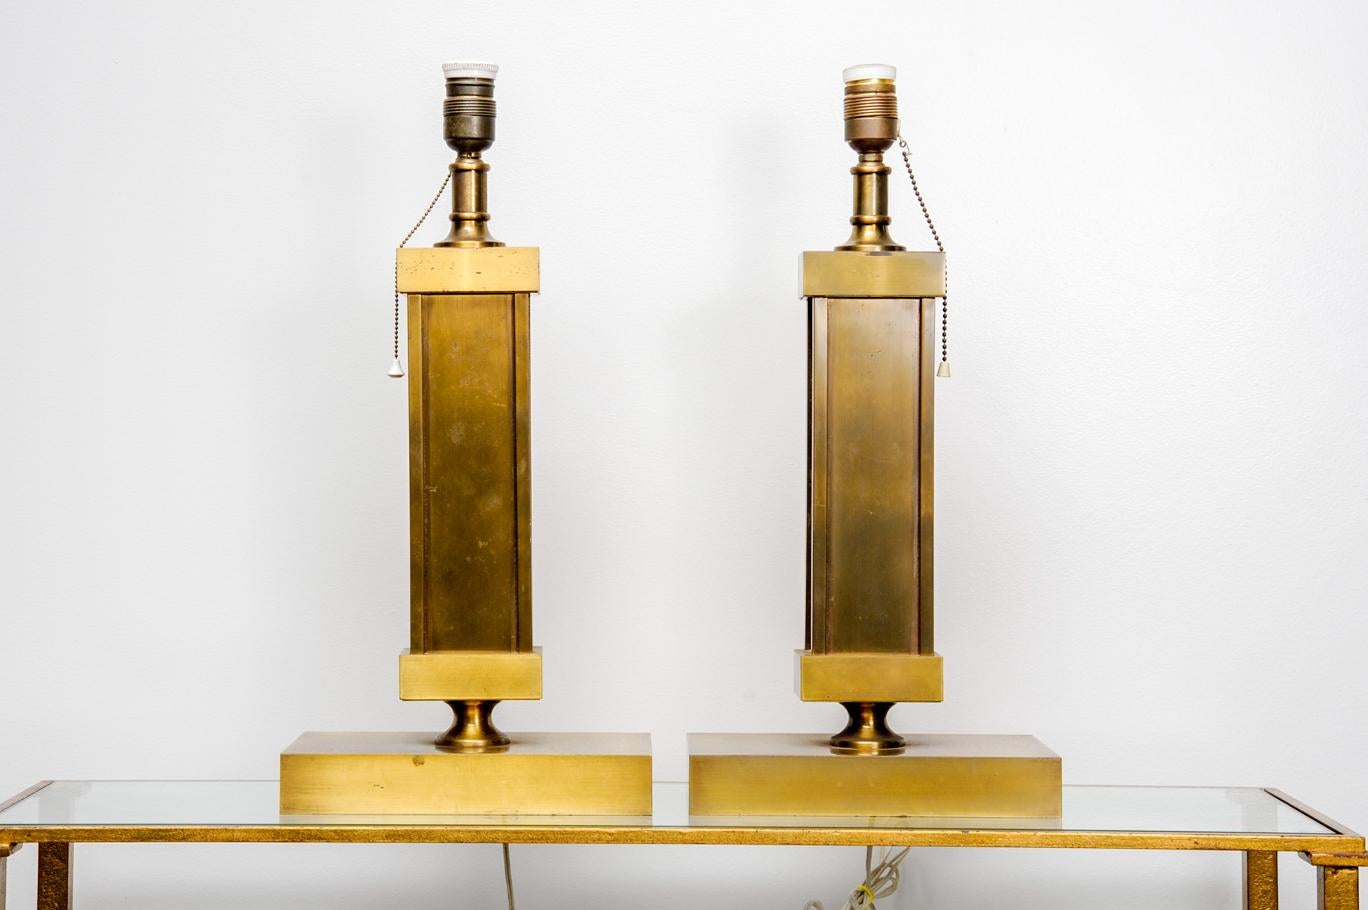 Pair of lamps in brass, modern design
In style of Jacques Quinet, circa 1970.